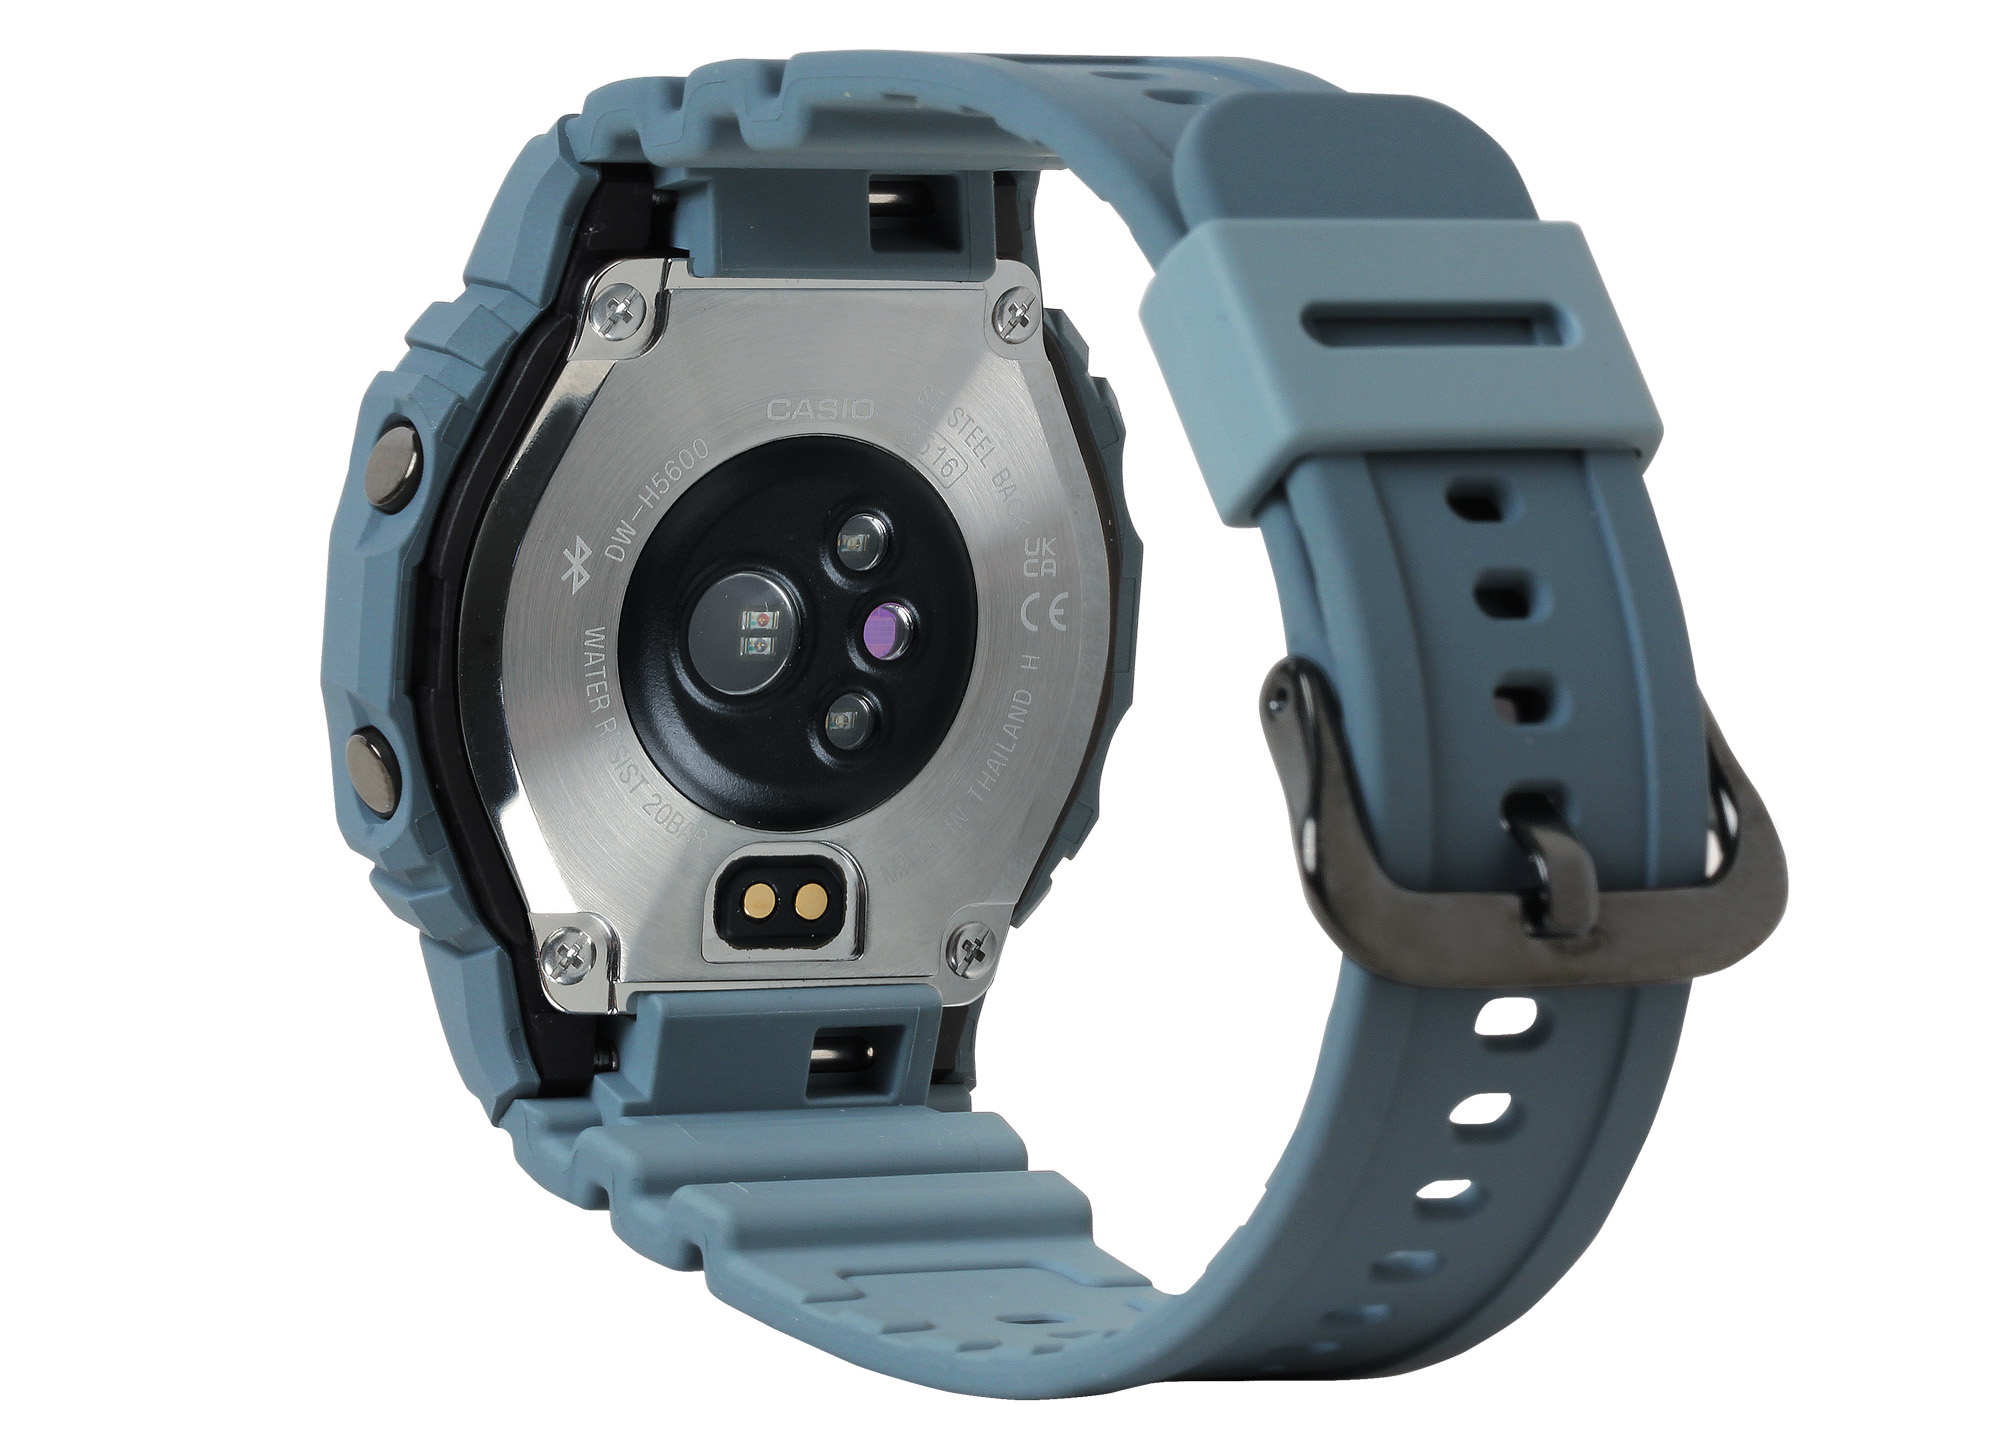 Casio Introduces The G-Shock Move DWH5600 Fitness Tracker Watch